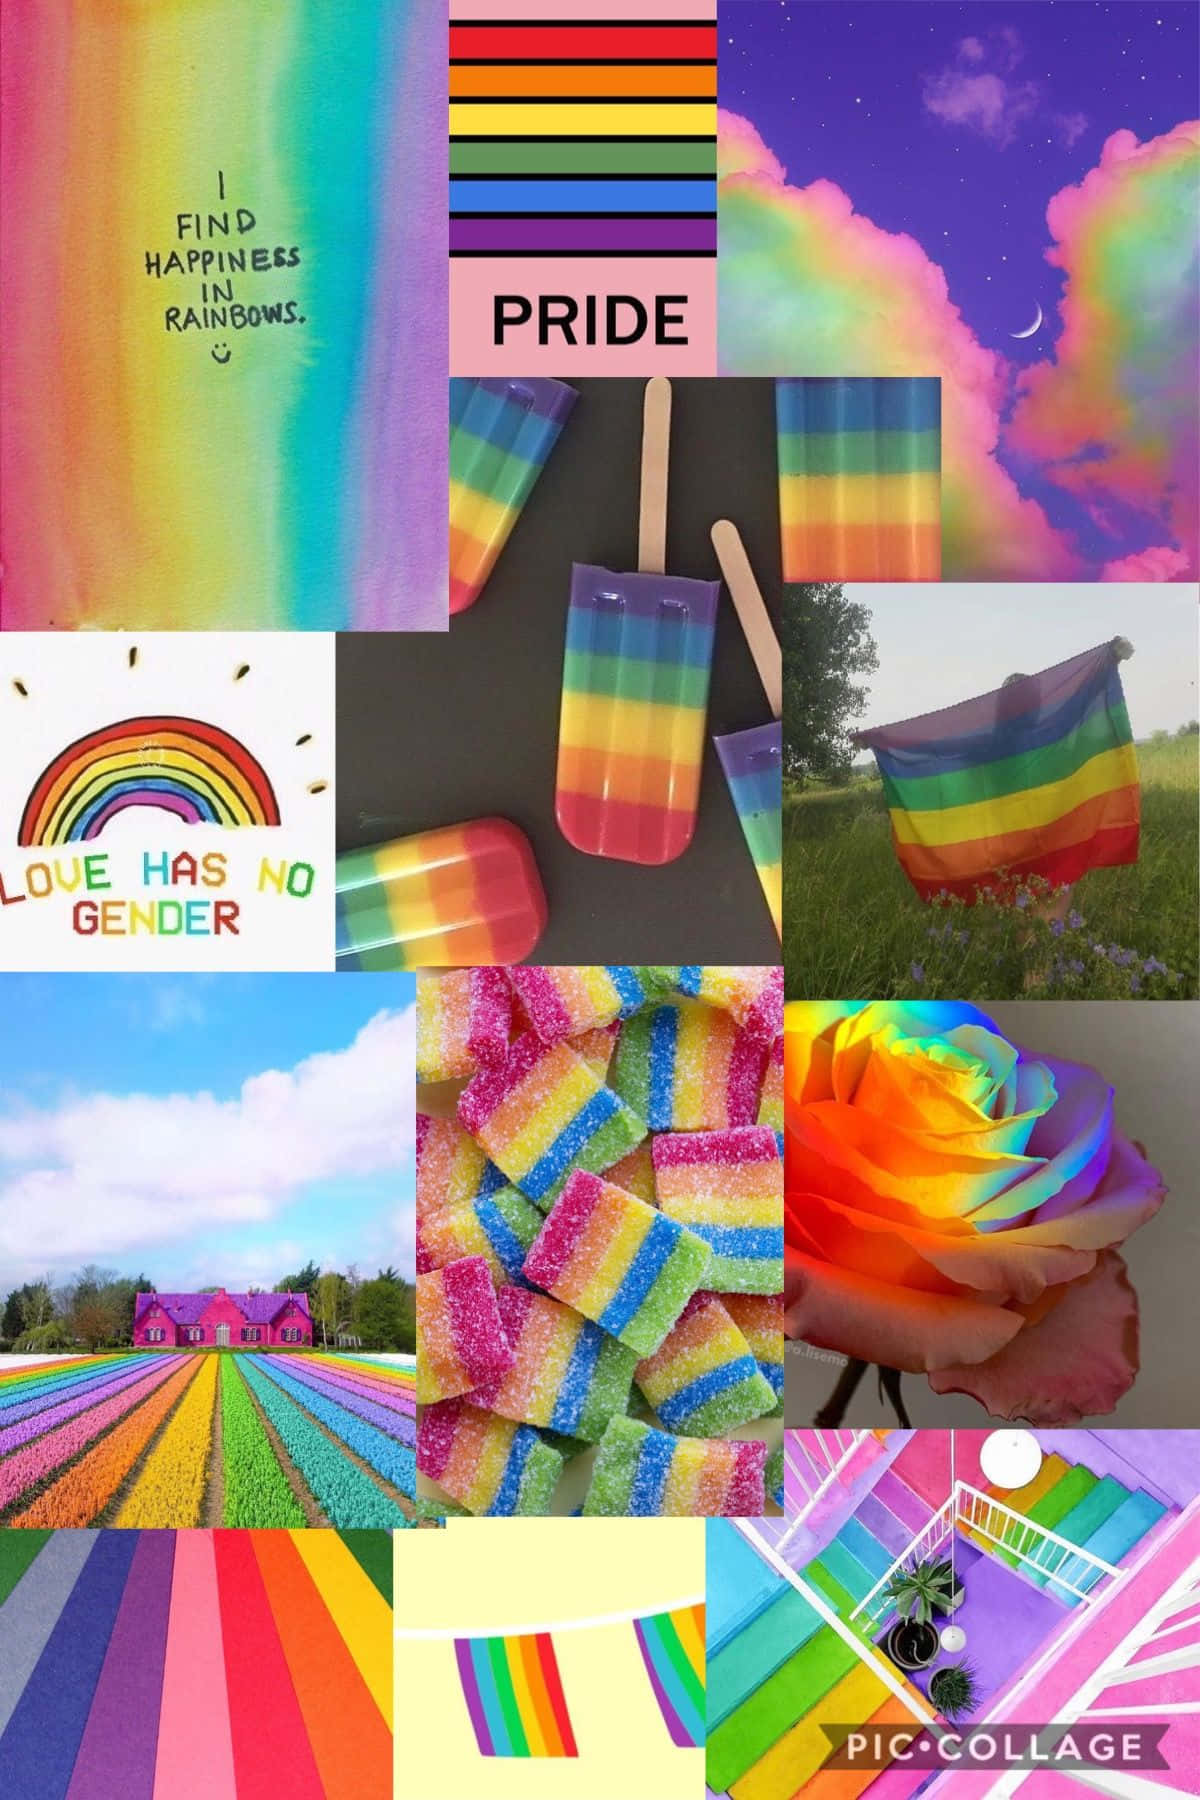 Aesthetic Lgbt Rainbow Pic Collage Wallpaper